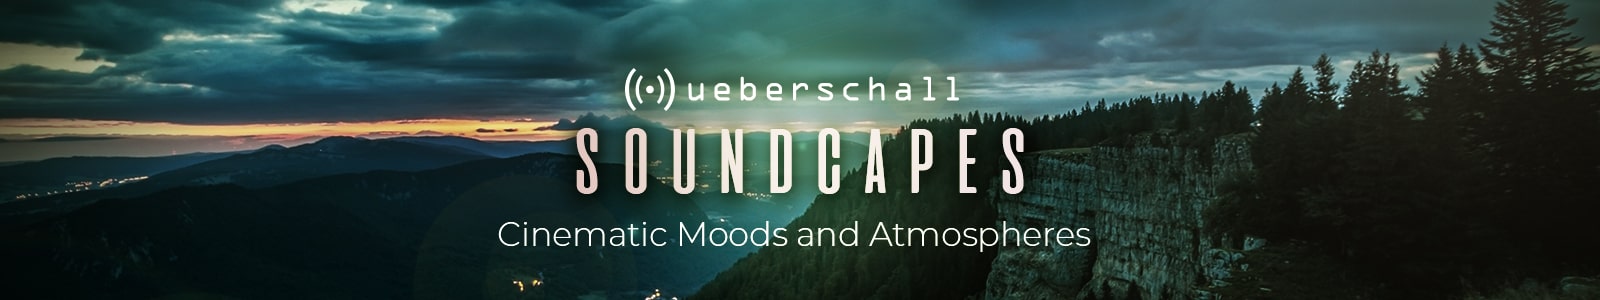 soundscapes by ueberschall